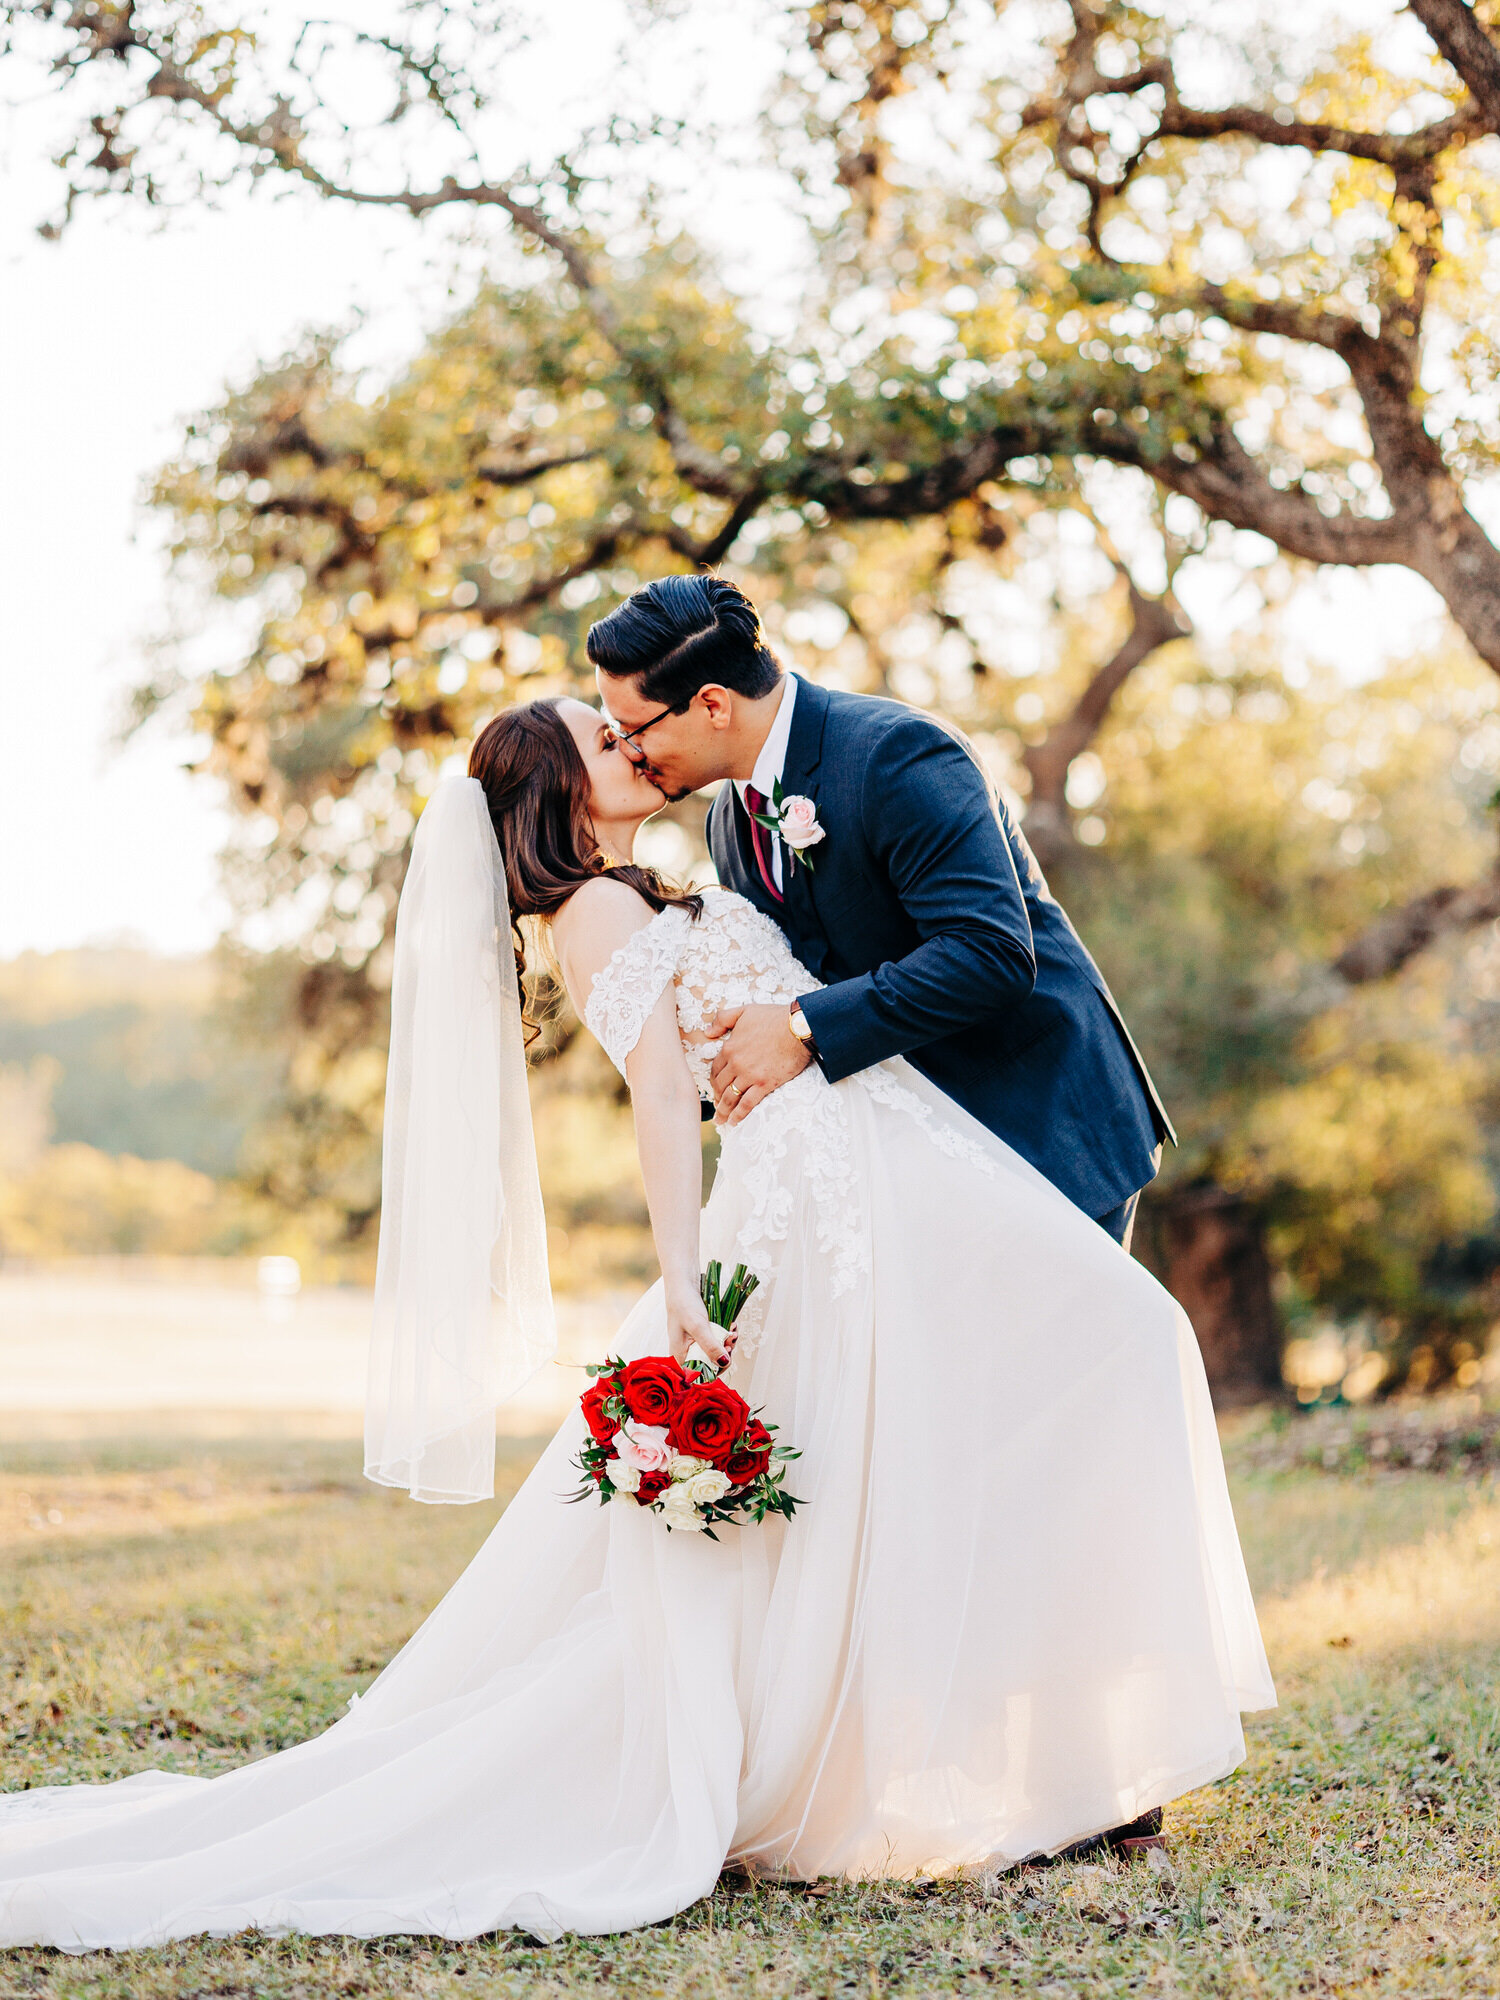 This image features a bride and a groom at a fall wedding. The groom, wearing a blue suit and a burgundy tie,  is dipping his bride while kissing her. The bride is wearing a mid-length veil. The image was taken by KD Captures, a wedding photographer in Denver..